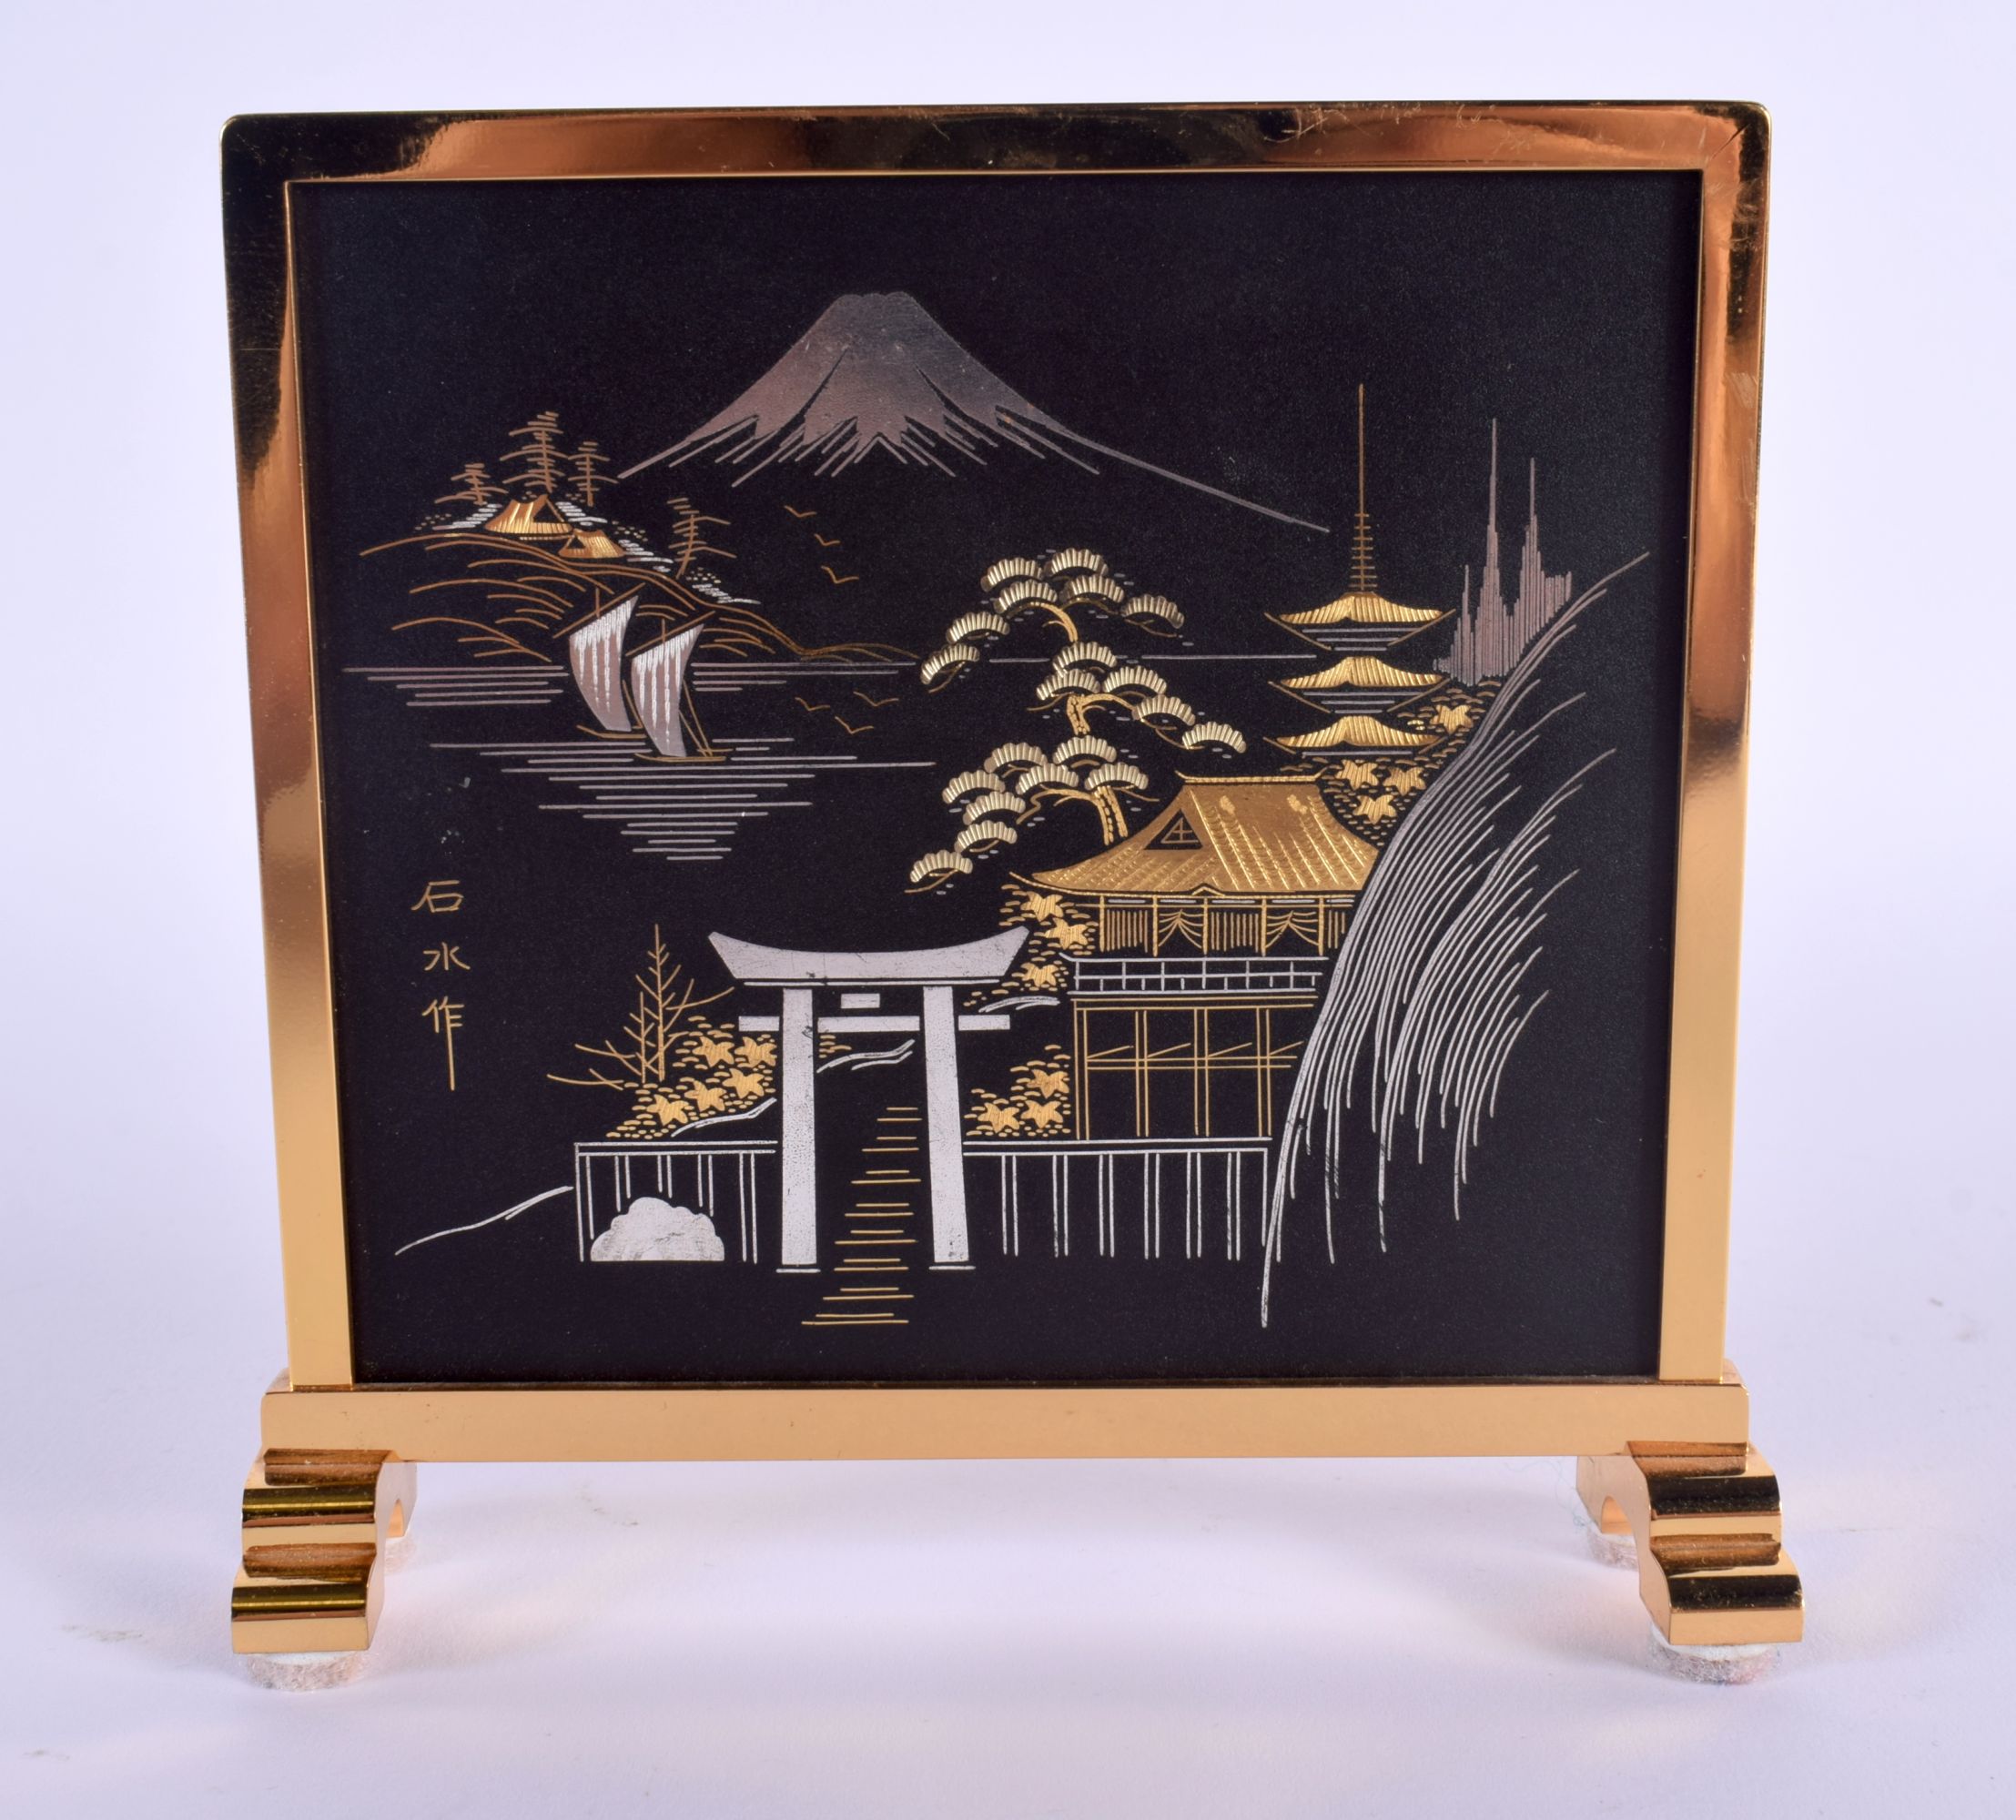 A JAPANESE TAISHO PERIOD MIXED METAL AMITA SCHOLARS SCREEN decorated with Mt Fuji. 11.5 cm x 11.5 cm